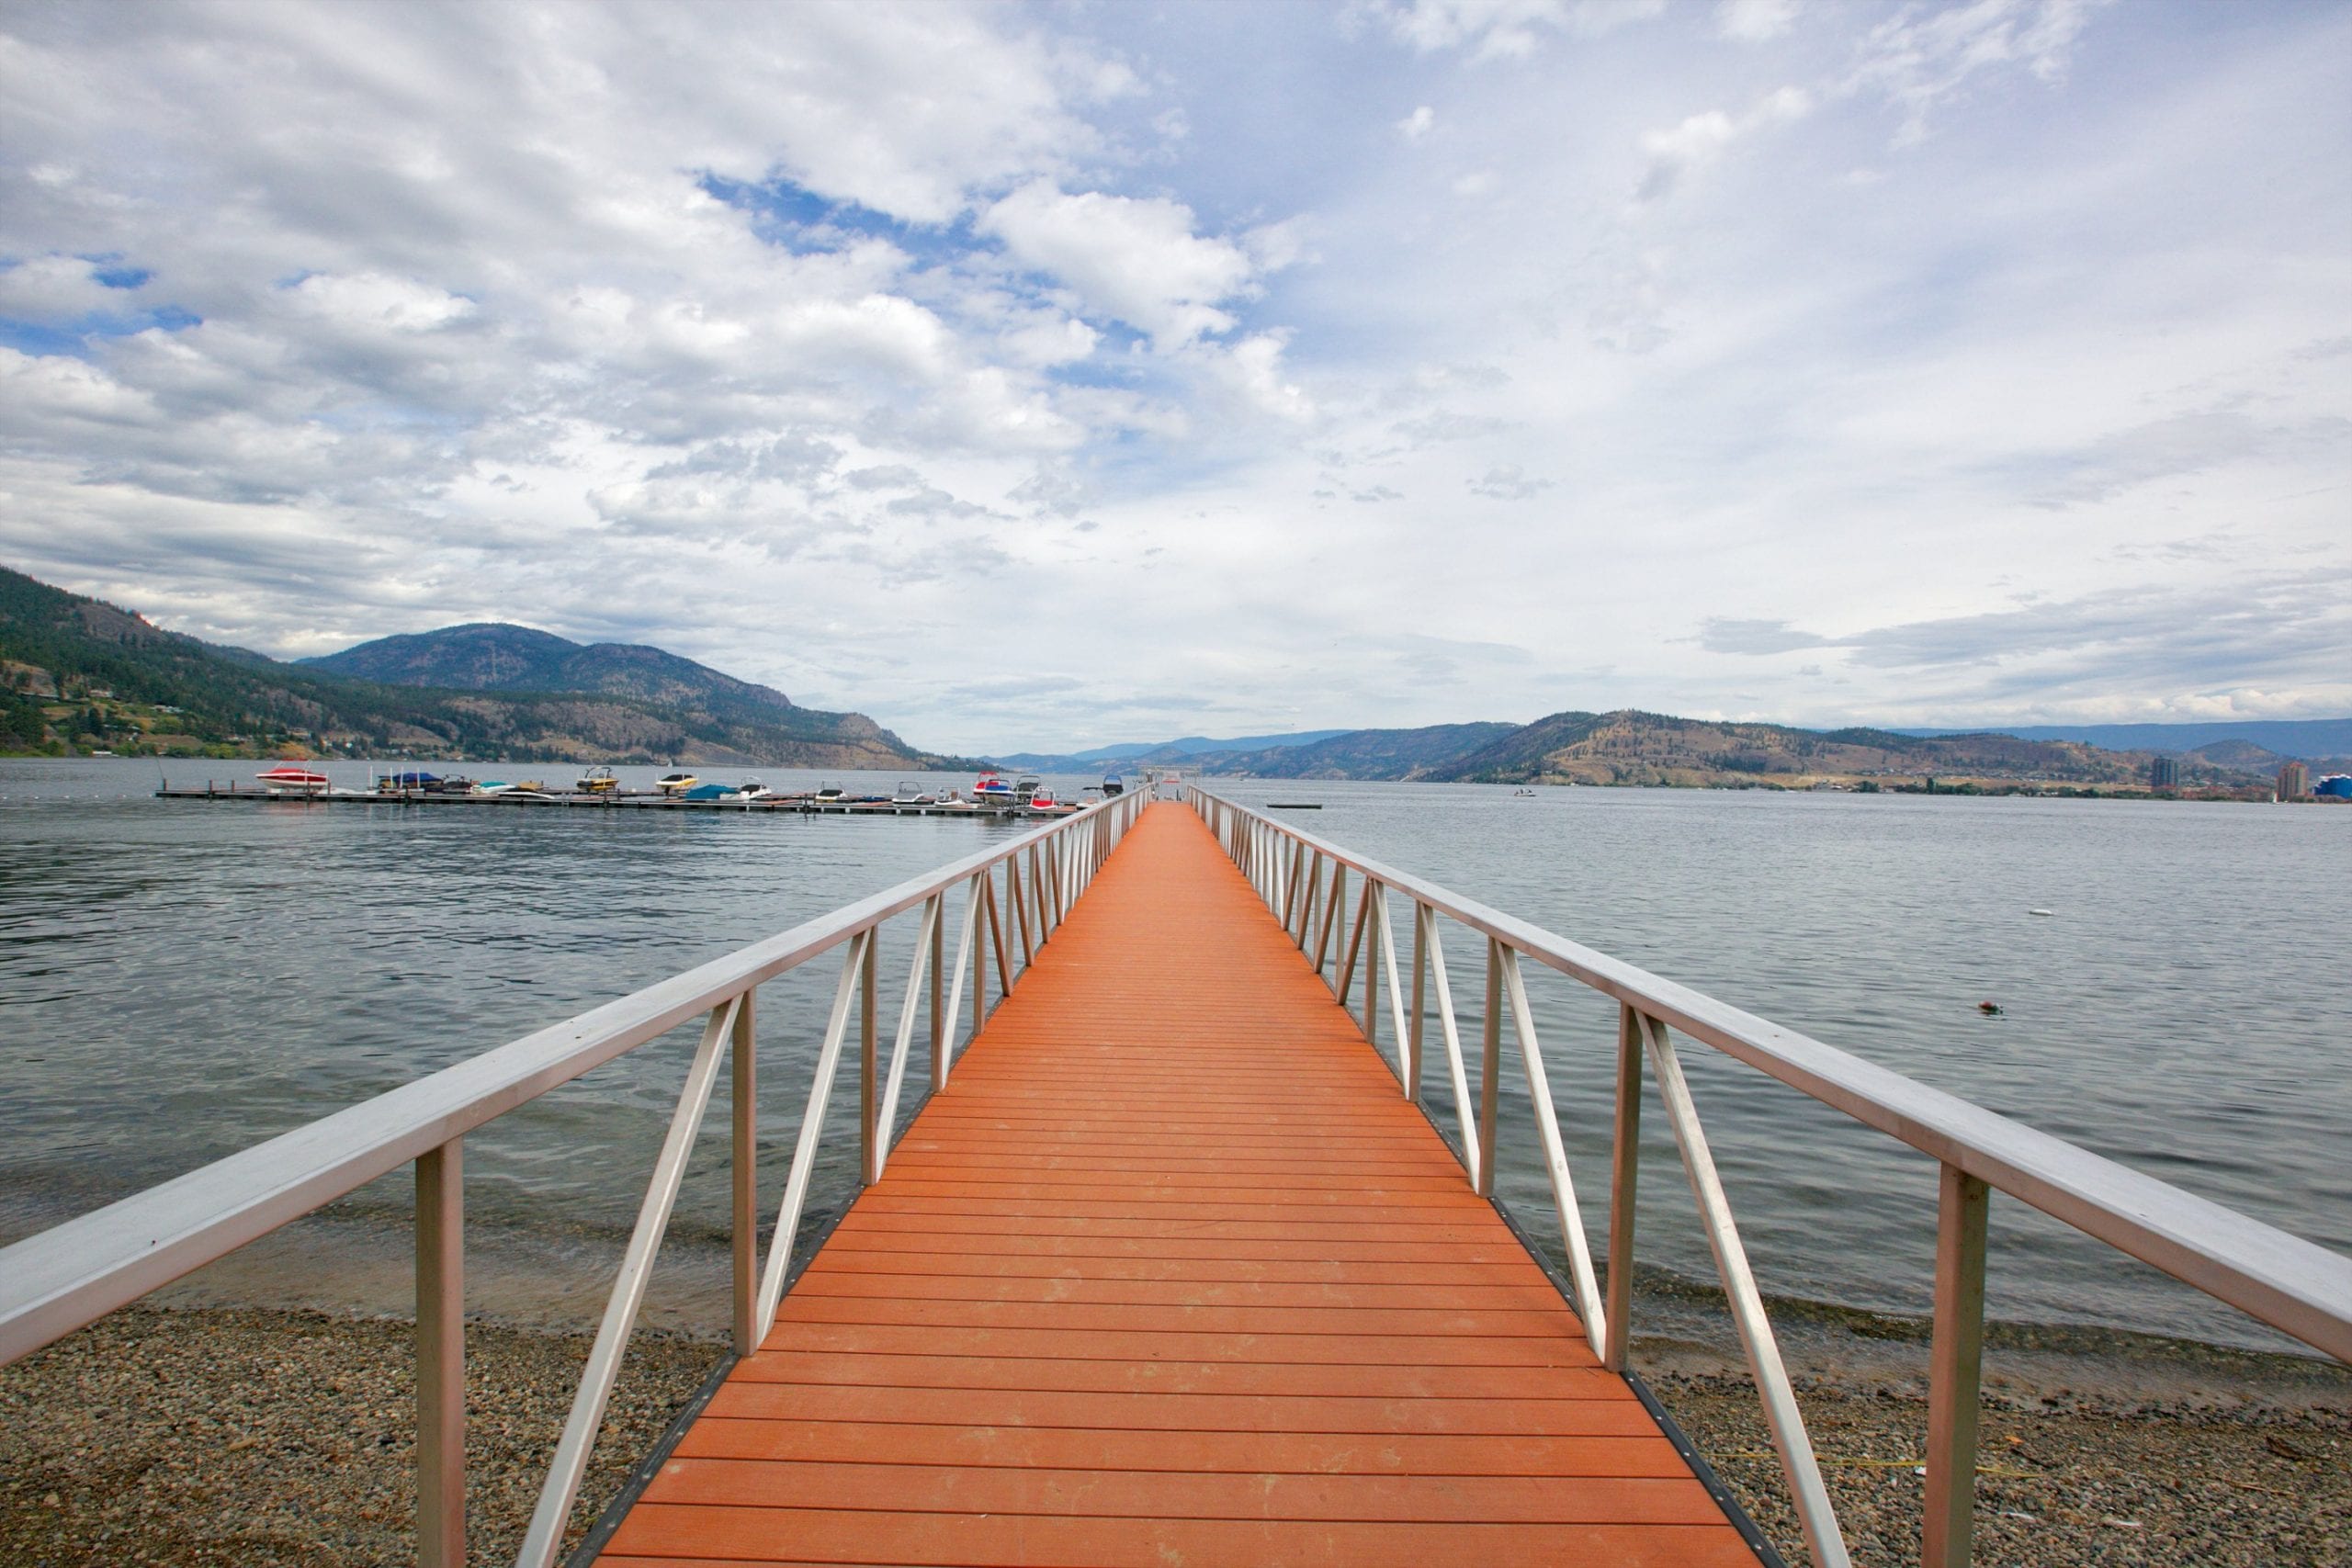 walkway shot staring directly at the marina on the okanagan lake with multiple boats parked